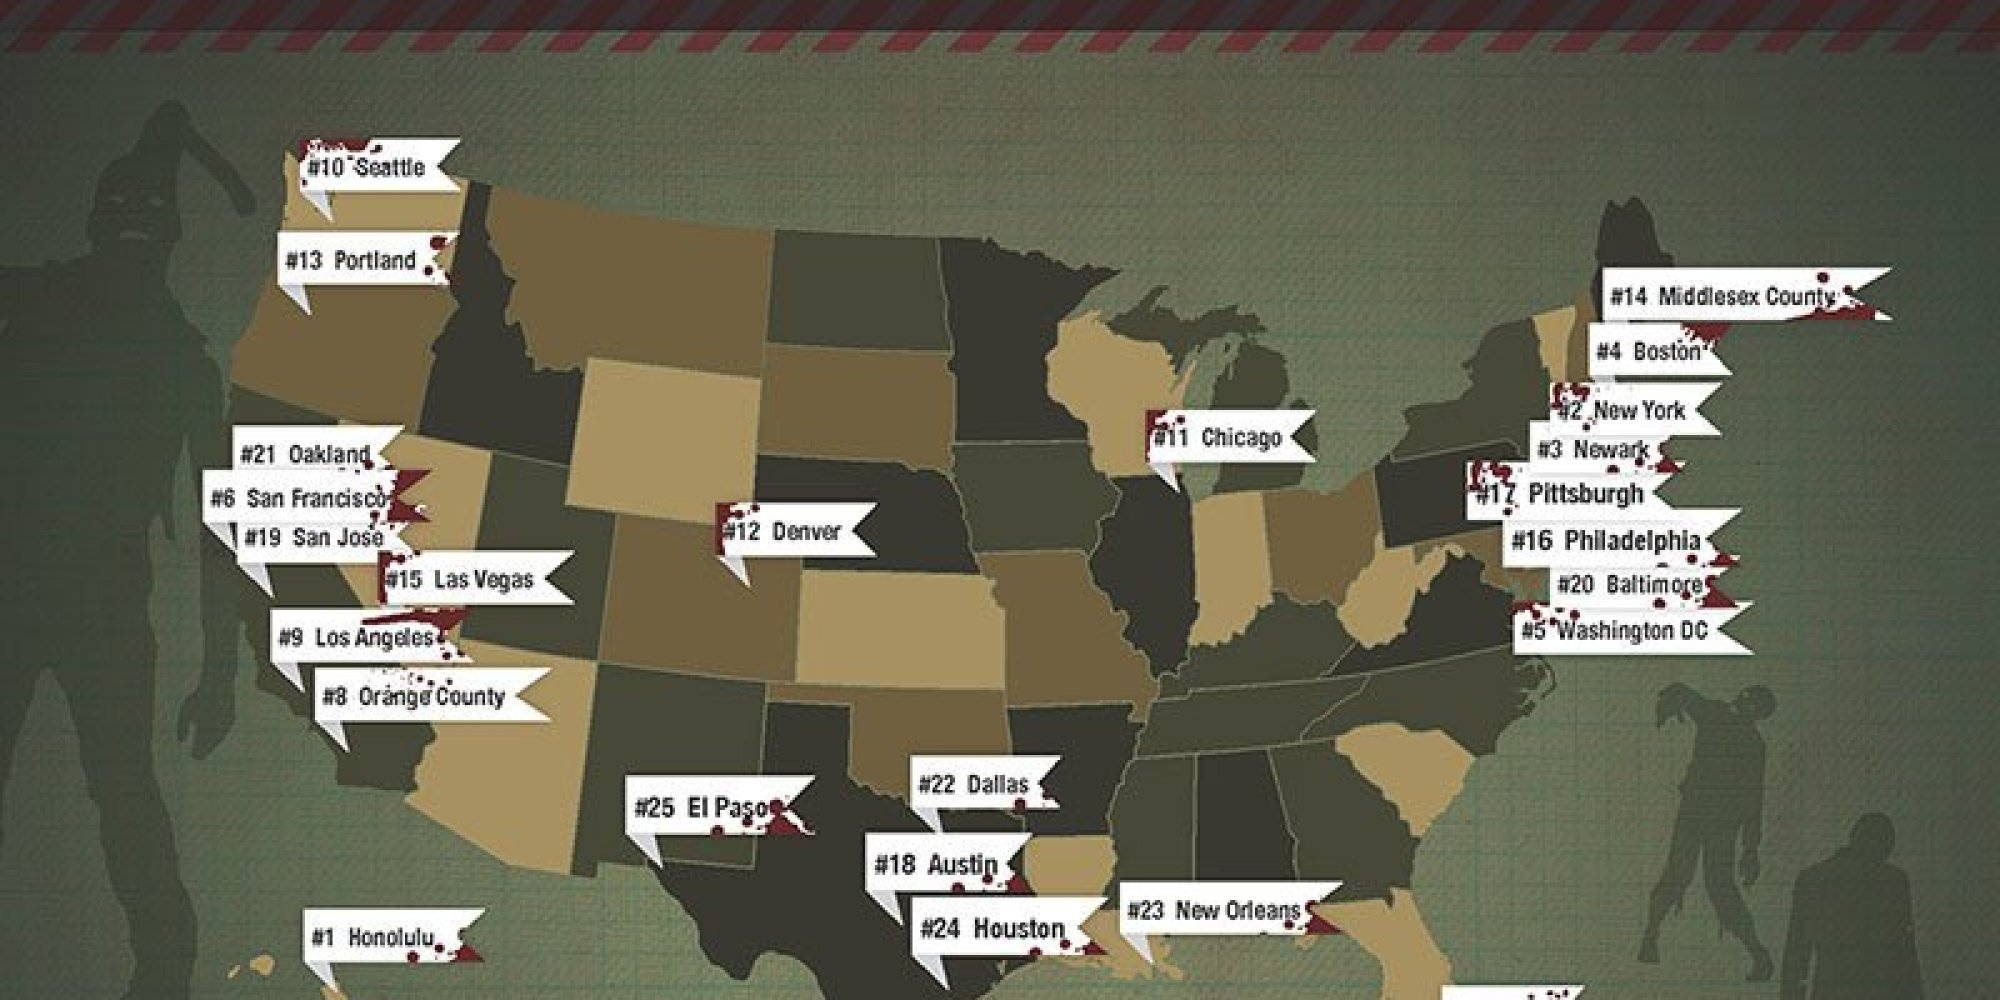 The Worst Places To Seek Refuge During The Zombie Apocalypse | HuffPost